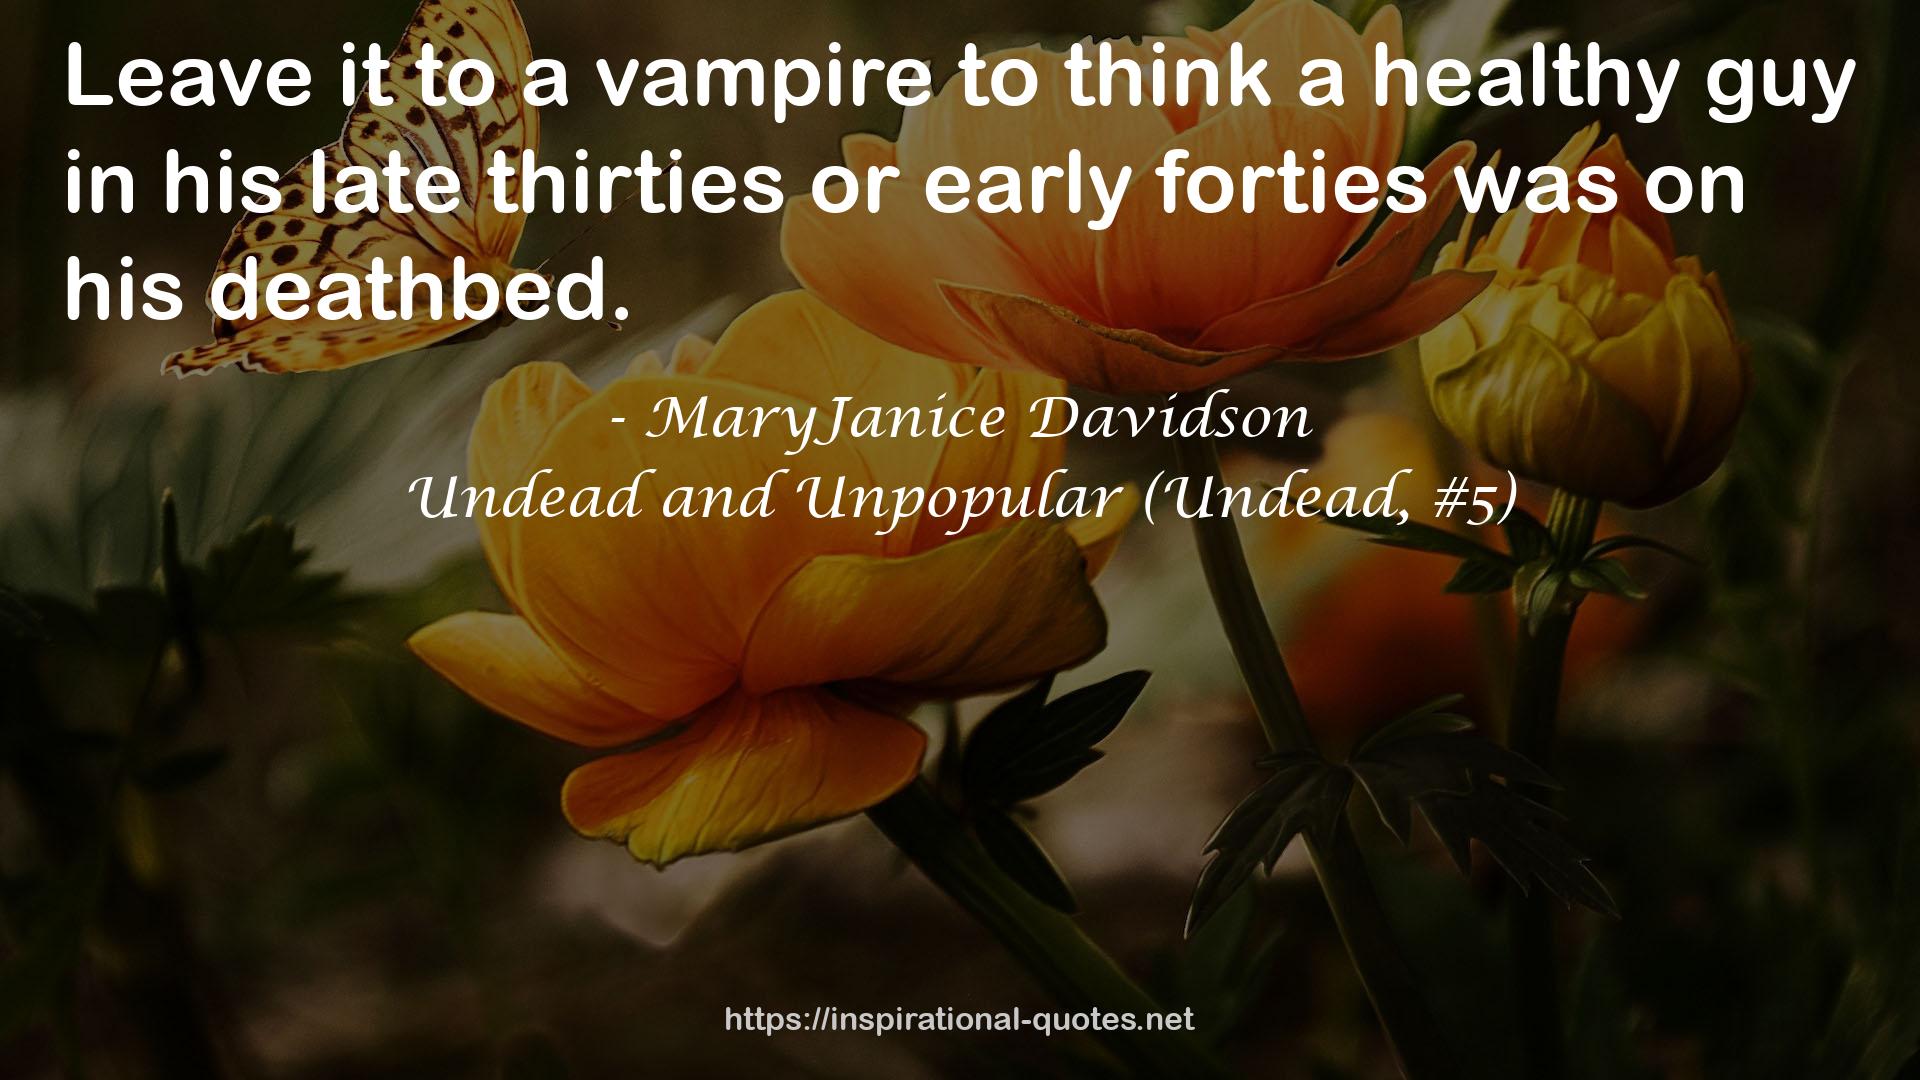 Undead and Unpopular (Undead, #5) QUOTES